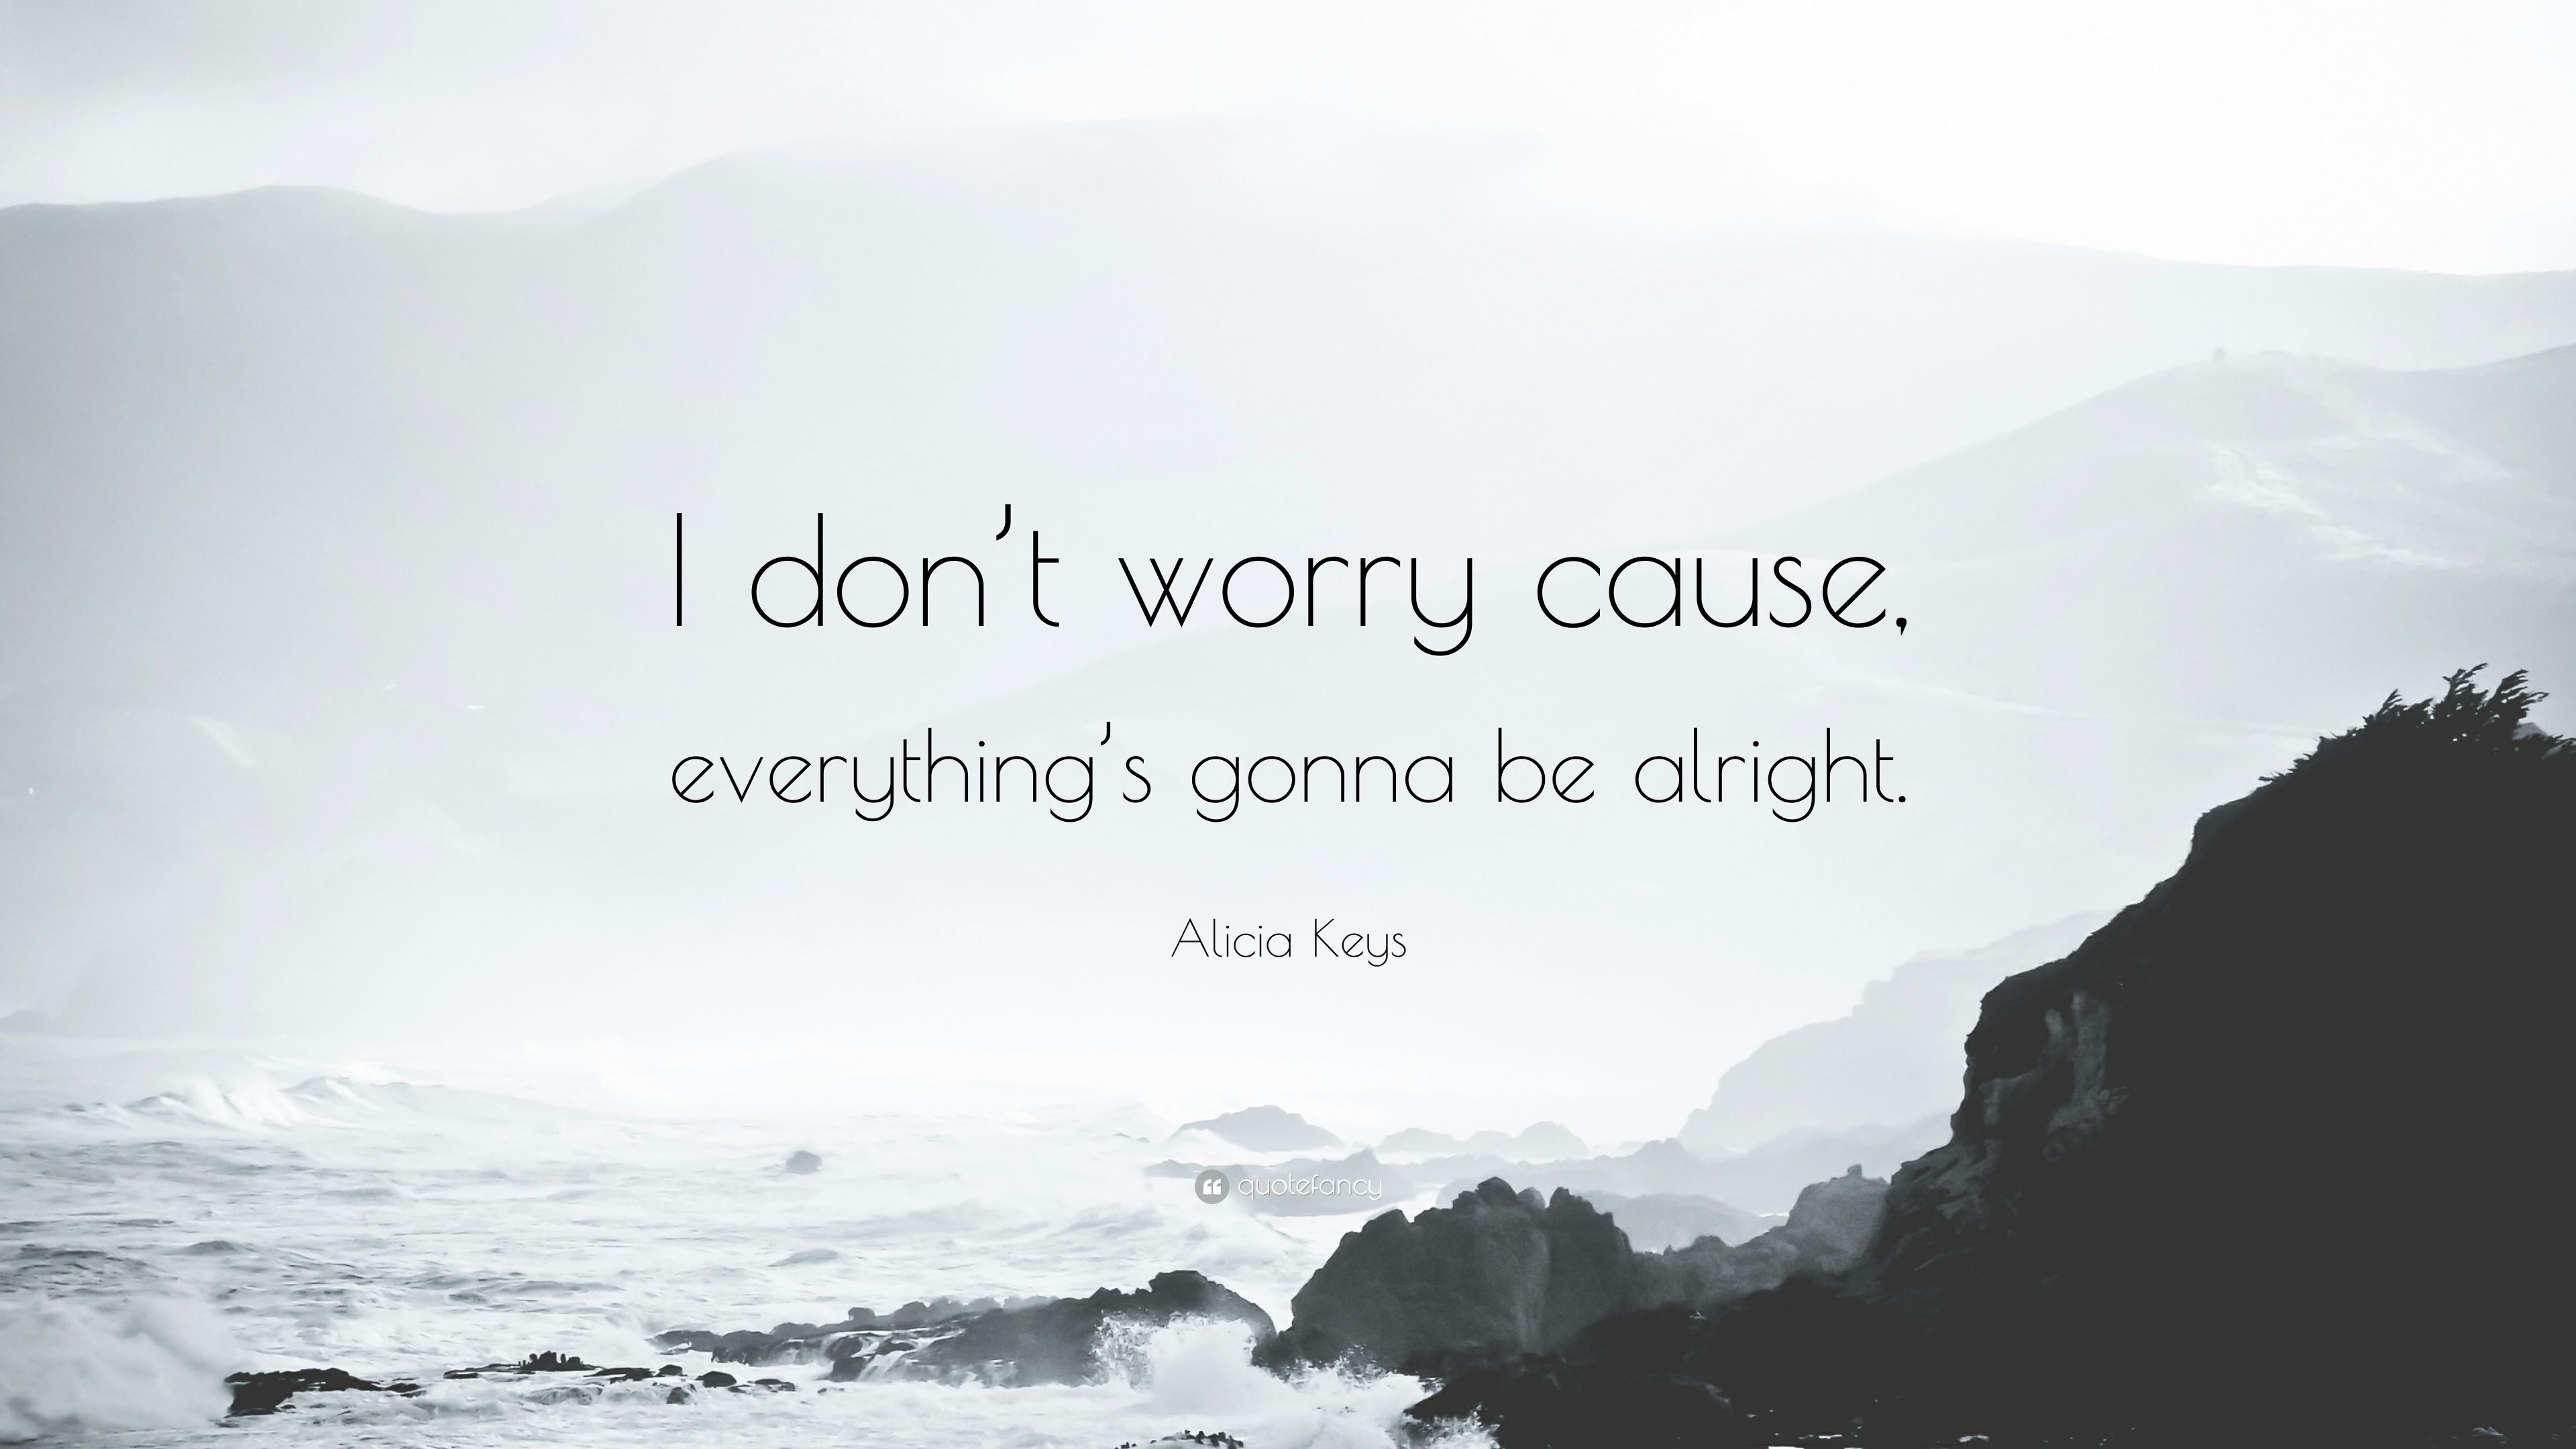 Alicia Keys Quote: “I don't worry cause, everything's gonna be alright.”